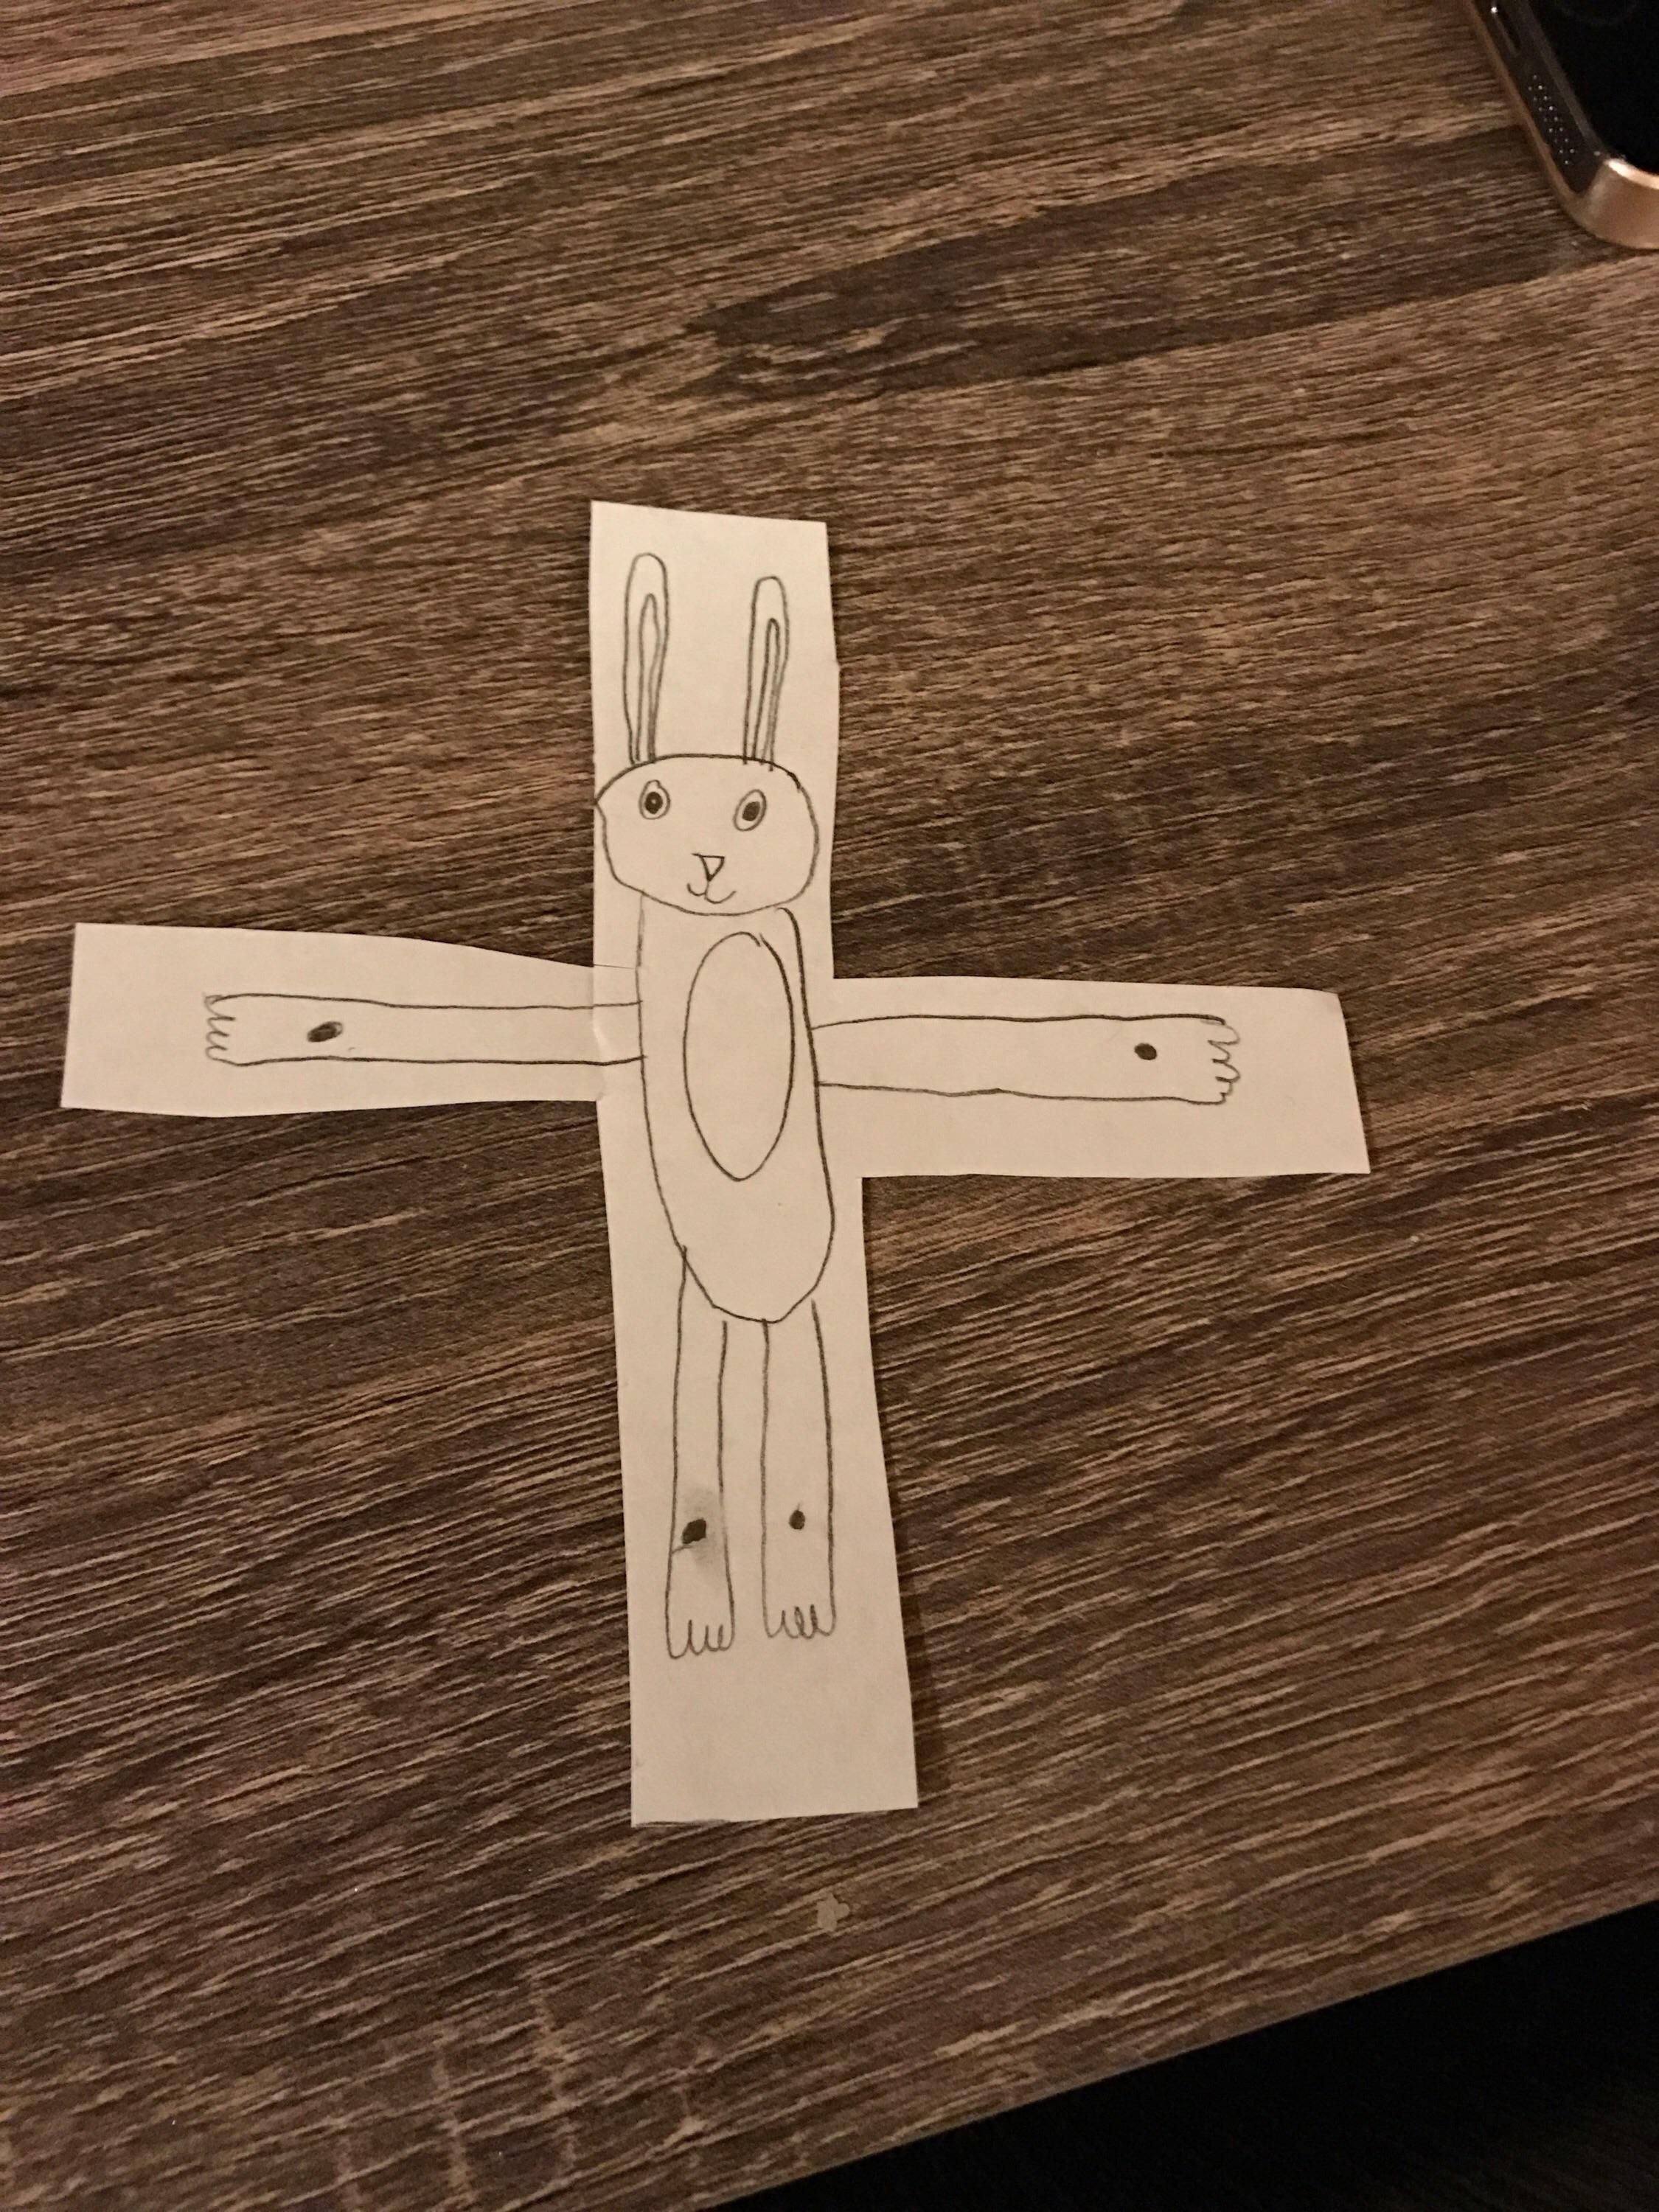 My sister started helping out with Sunday school at her local church. One of the kids drew this over the weekend. The assignment was to draw a picture that best represents what Easter is.